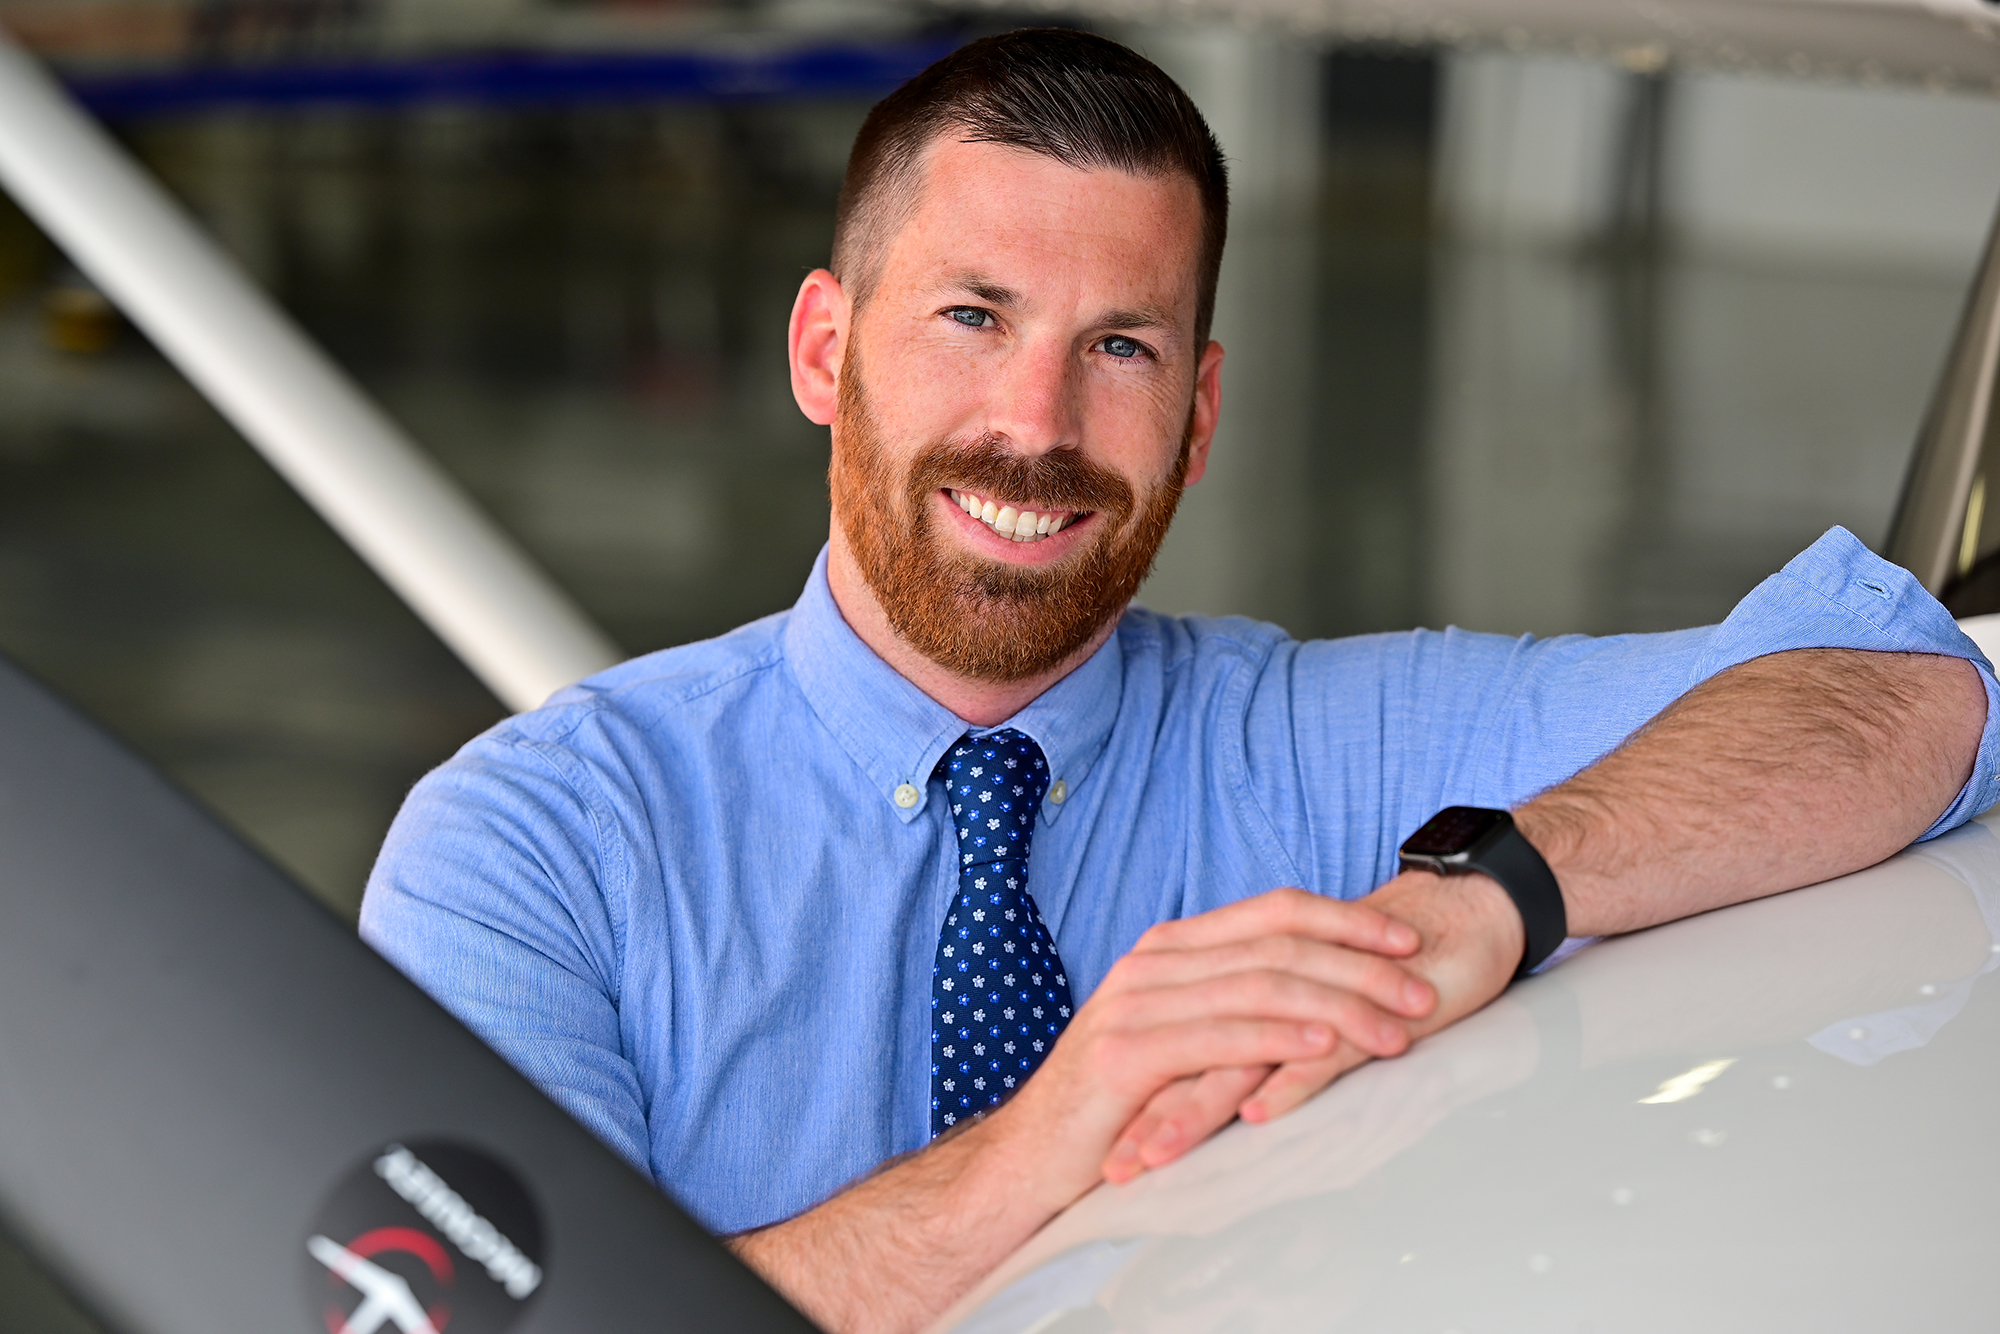 AOPA Medical Certificate Specialist Cade Halle poses for a photo at Frederick Municipal Airport in Frederick, Maryland, May 4, 2022. Photo by David Tulis.